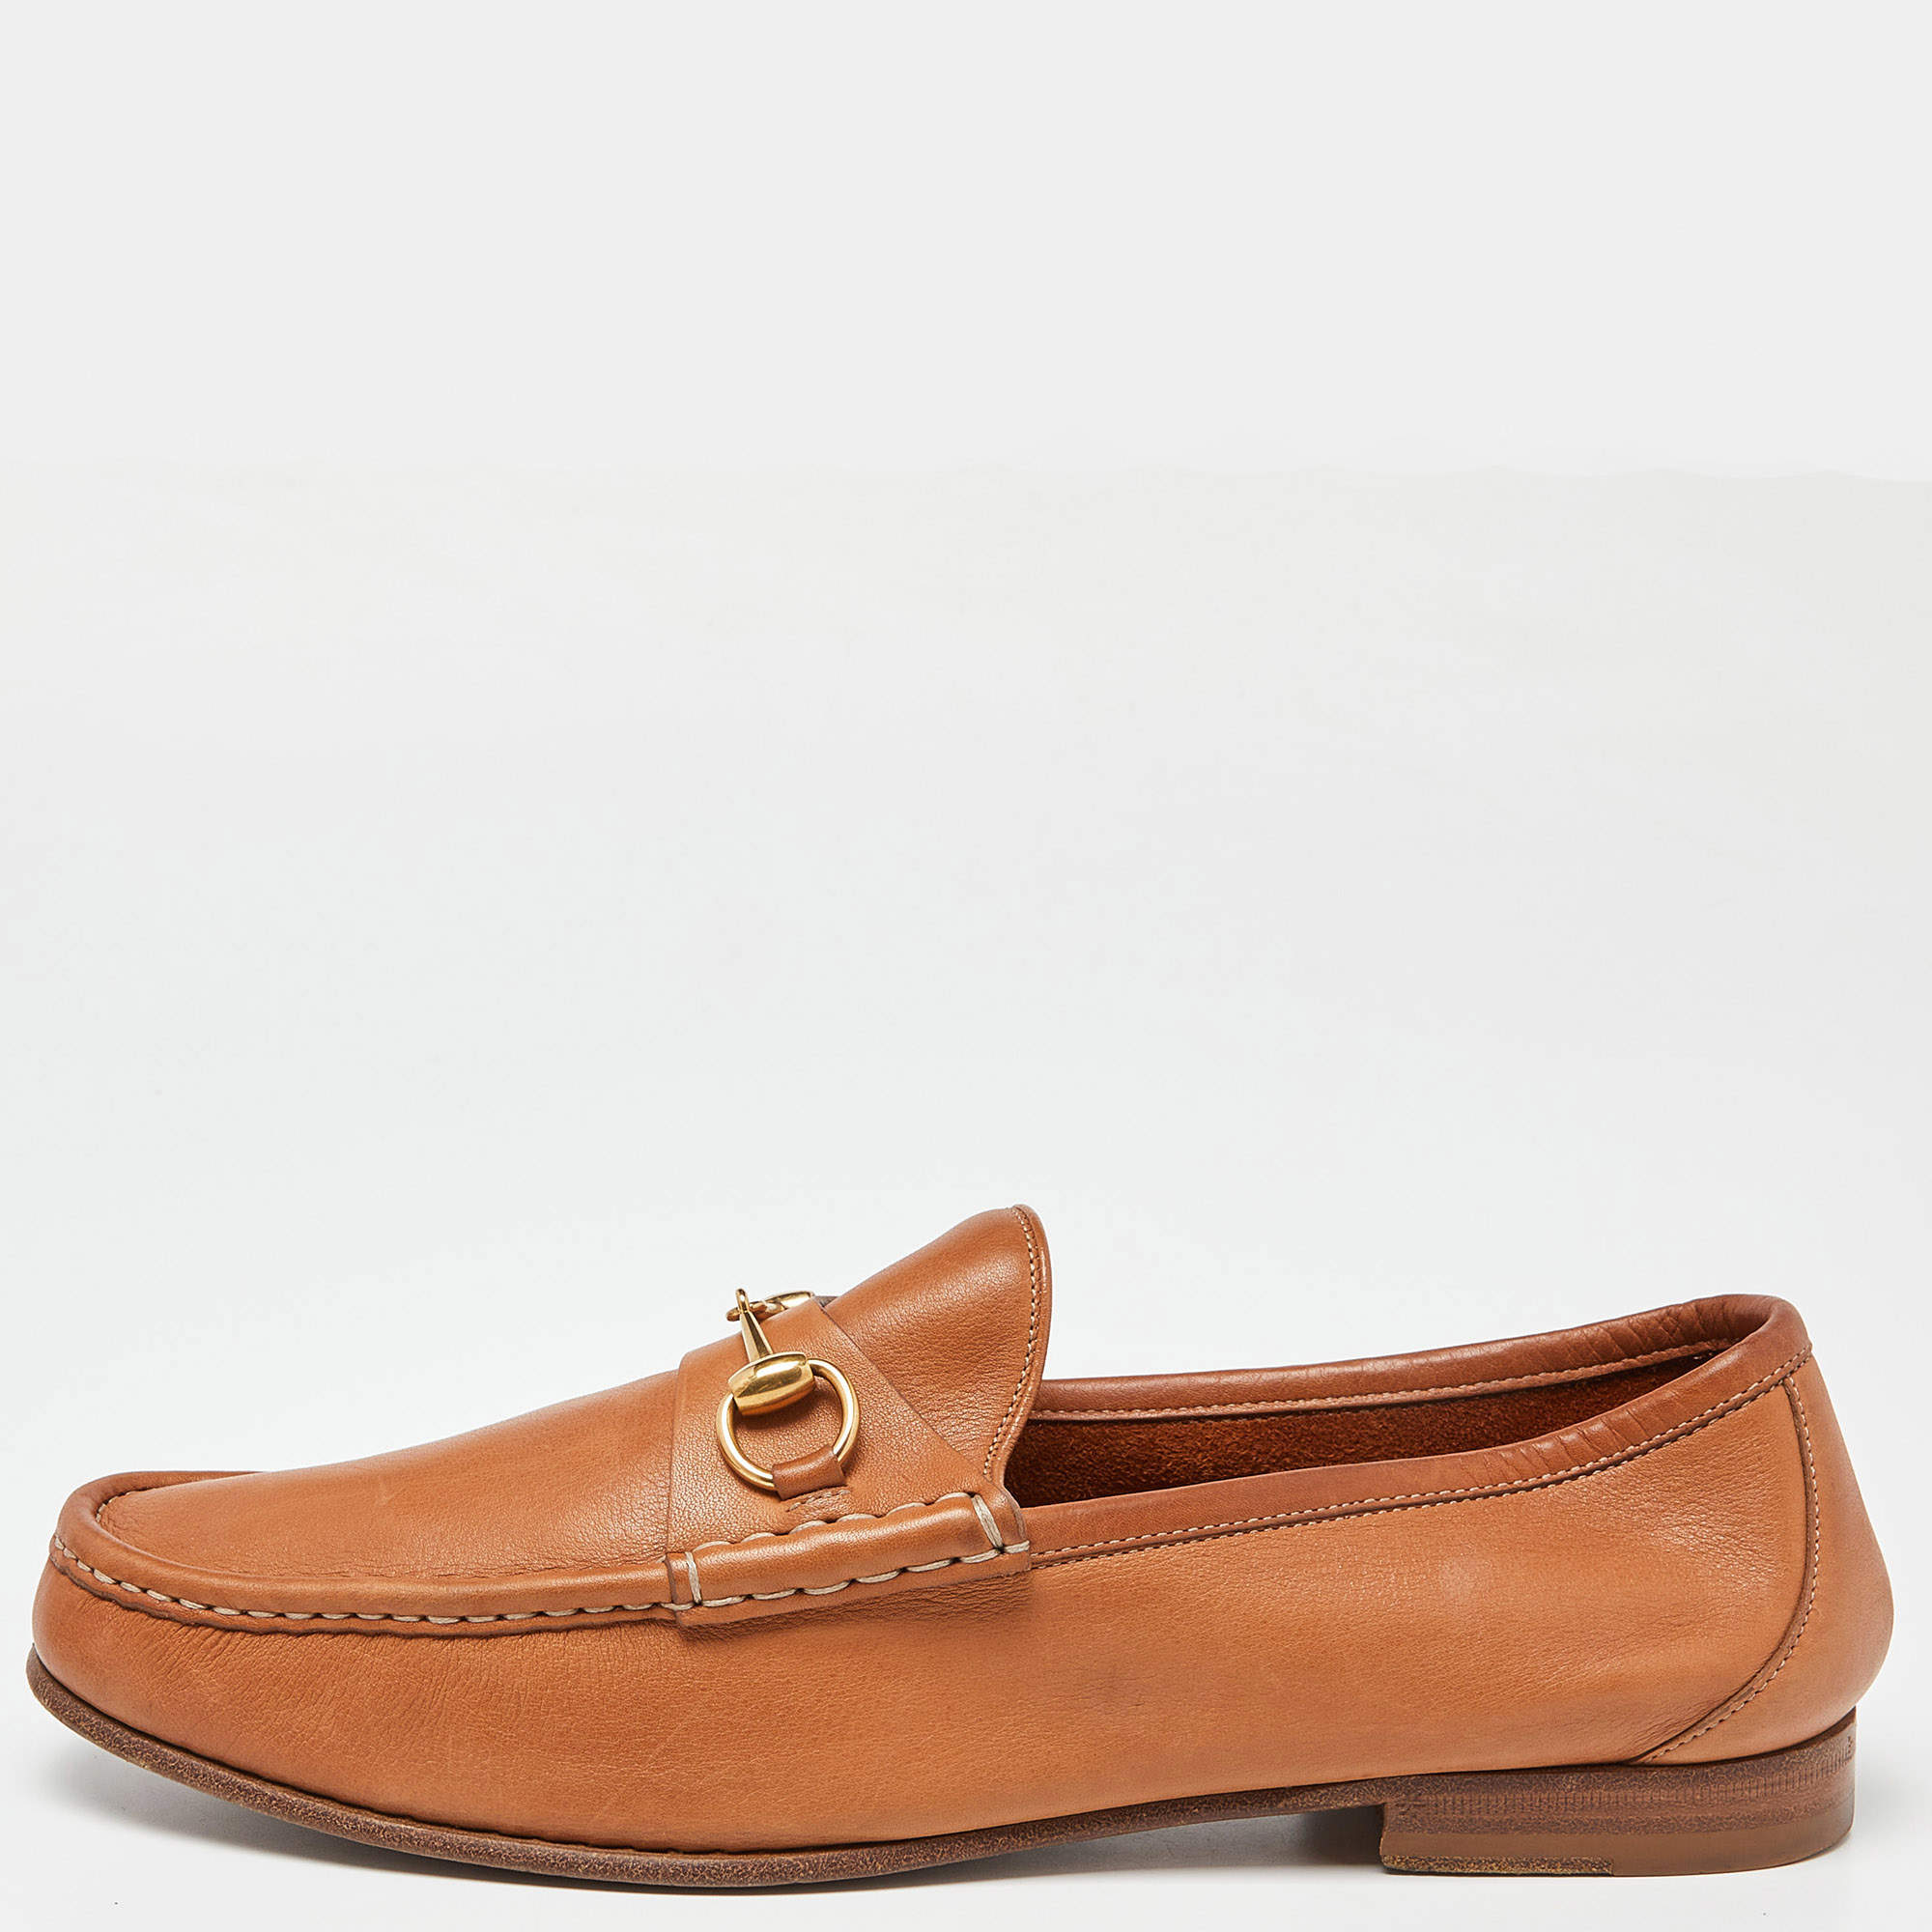 Gucci Tan Leather Horsebit Loafers Size 45